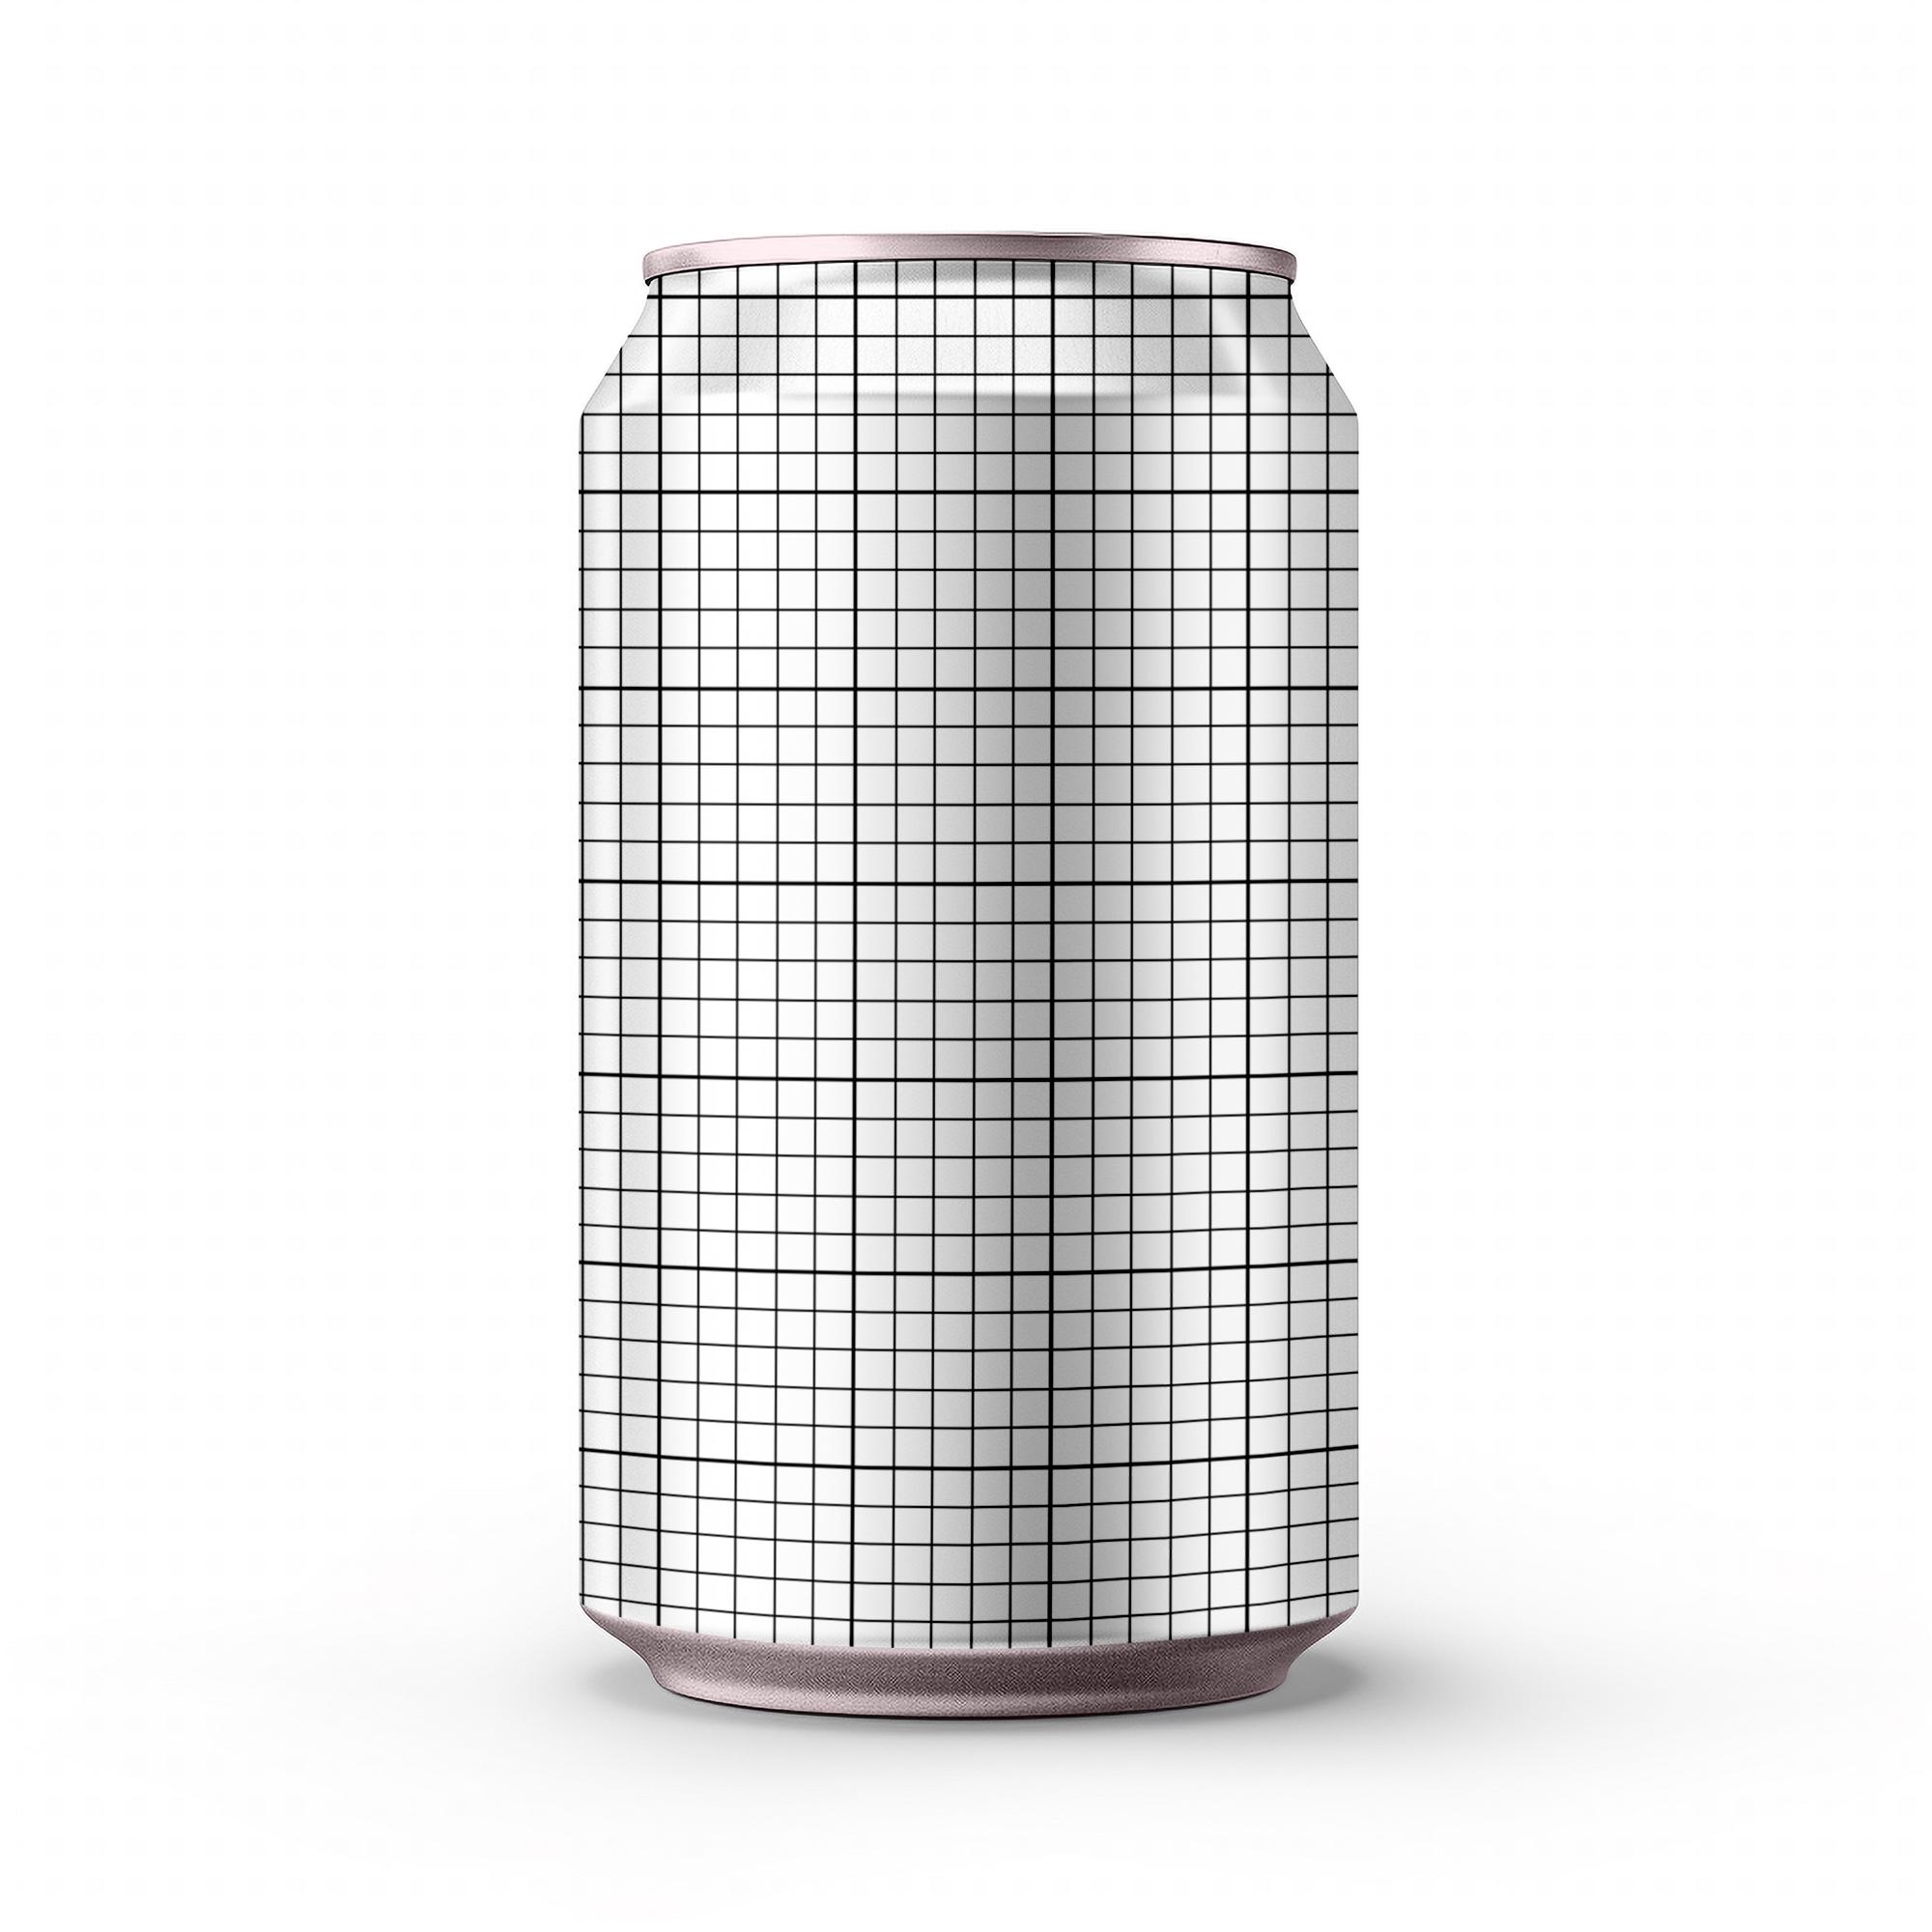 Free Download Beer can showcase hd mockup